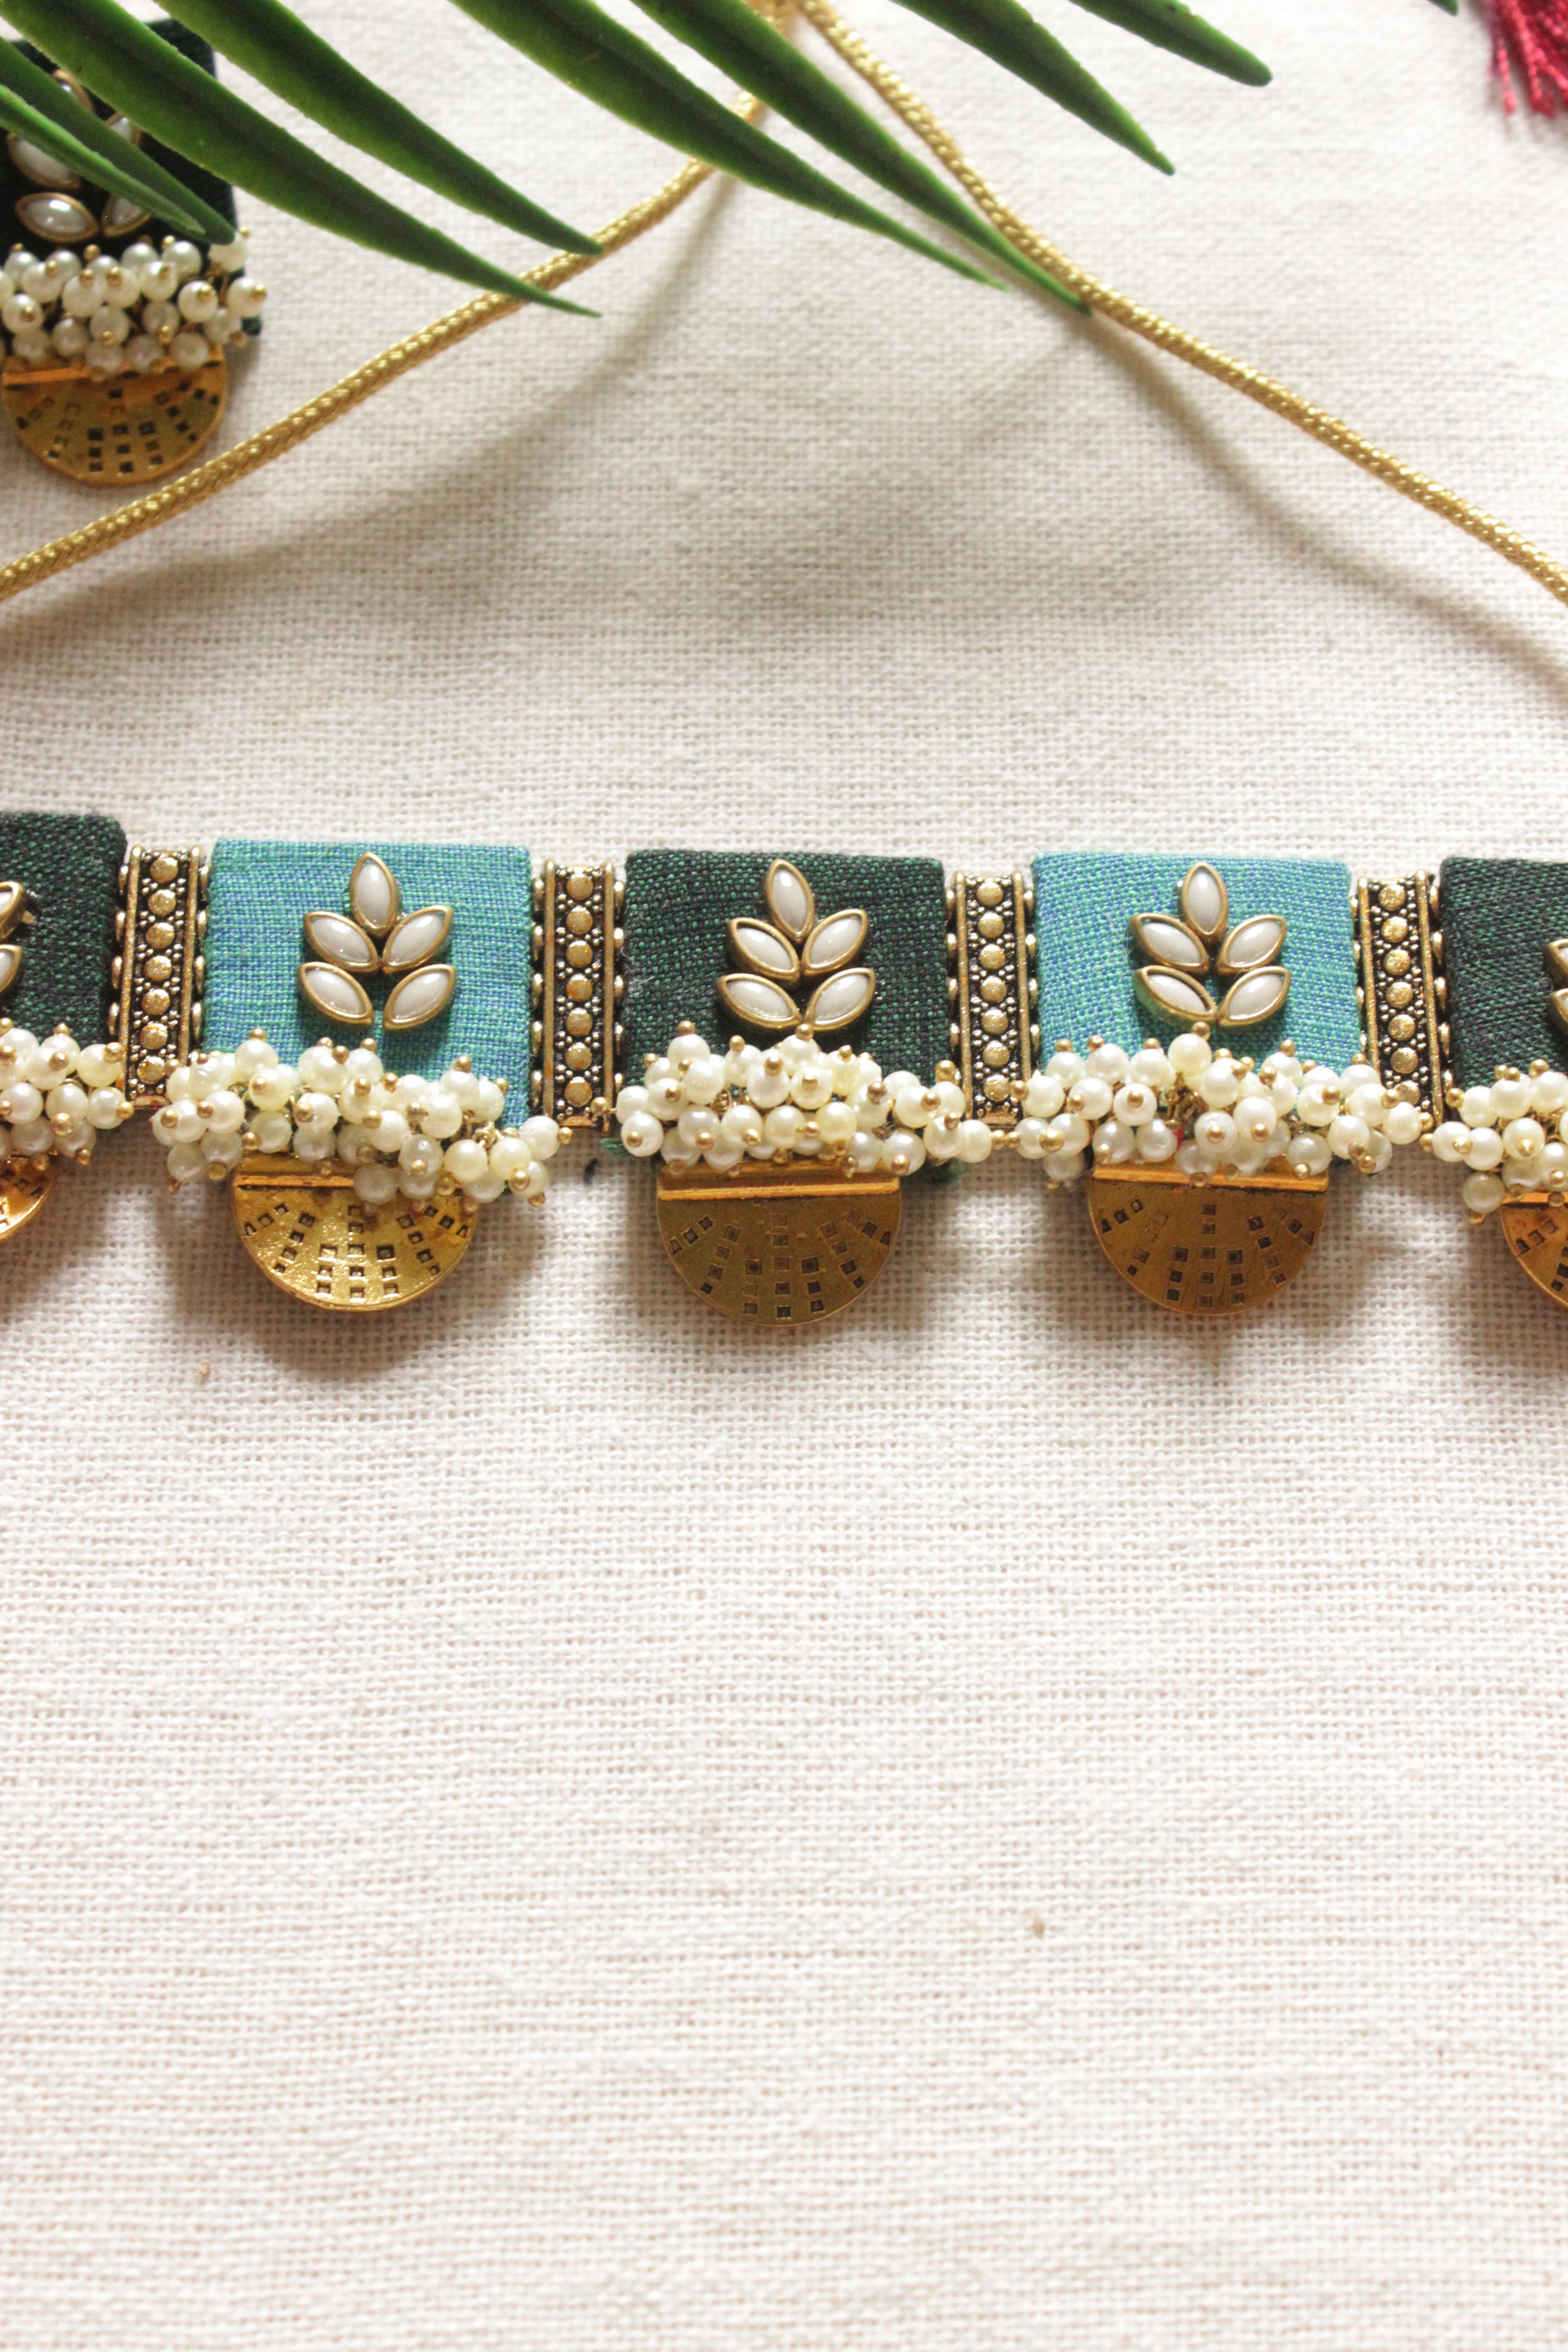 Green & Turquoise Gold Tones White Beads Embellished Fabric Choker Necklace Set with Adjustable Closure